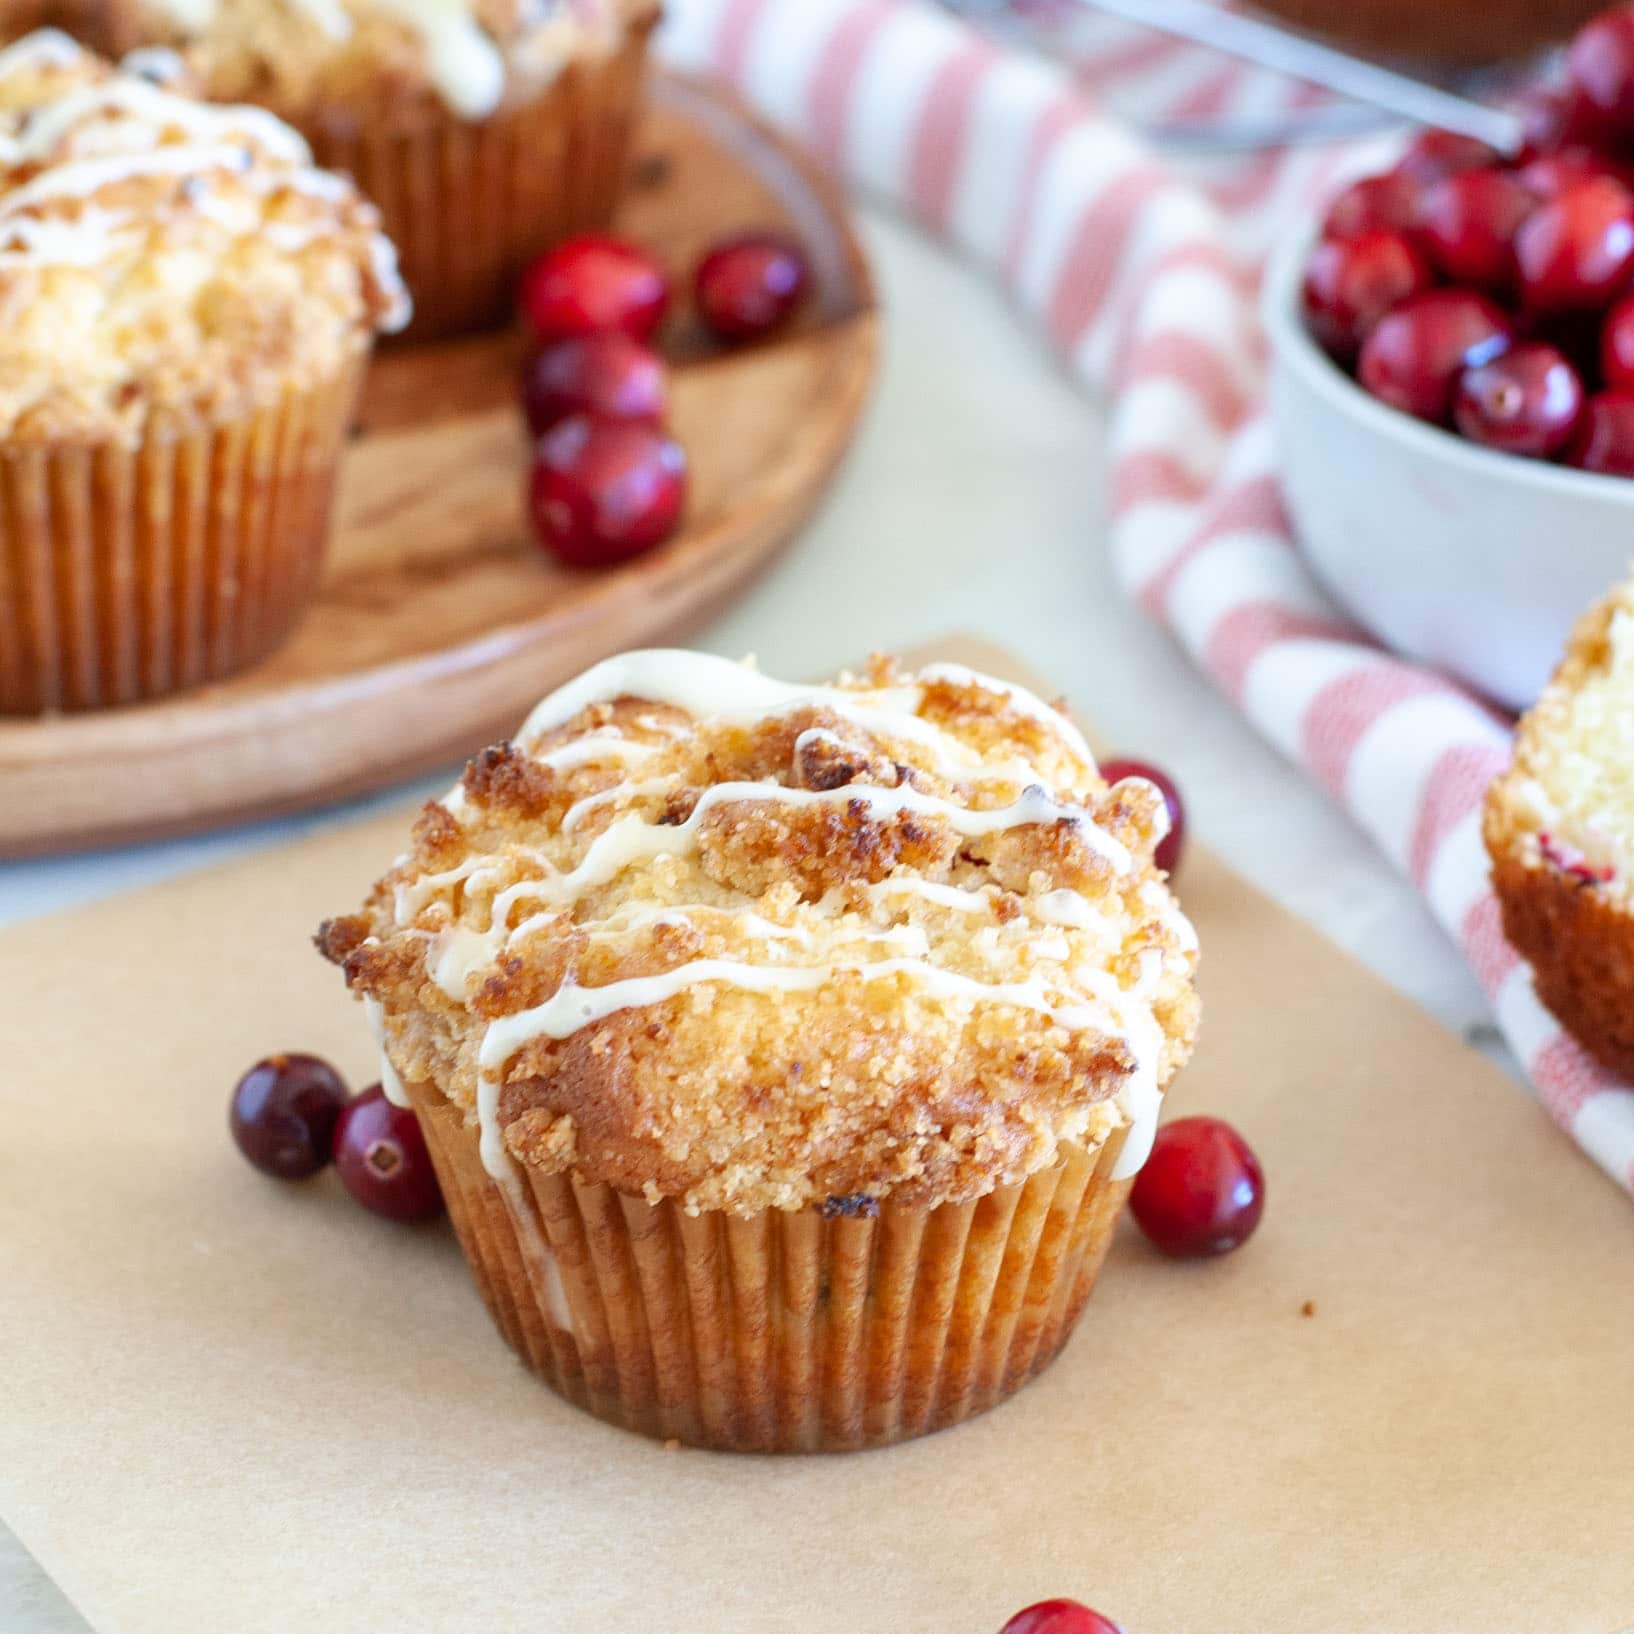 Muffins on a plate and on paper with cranberries.